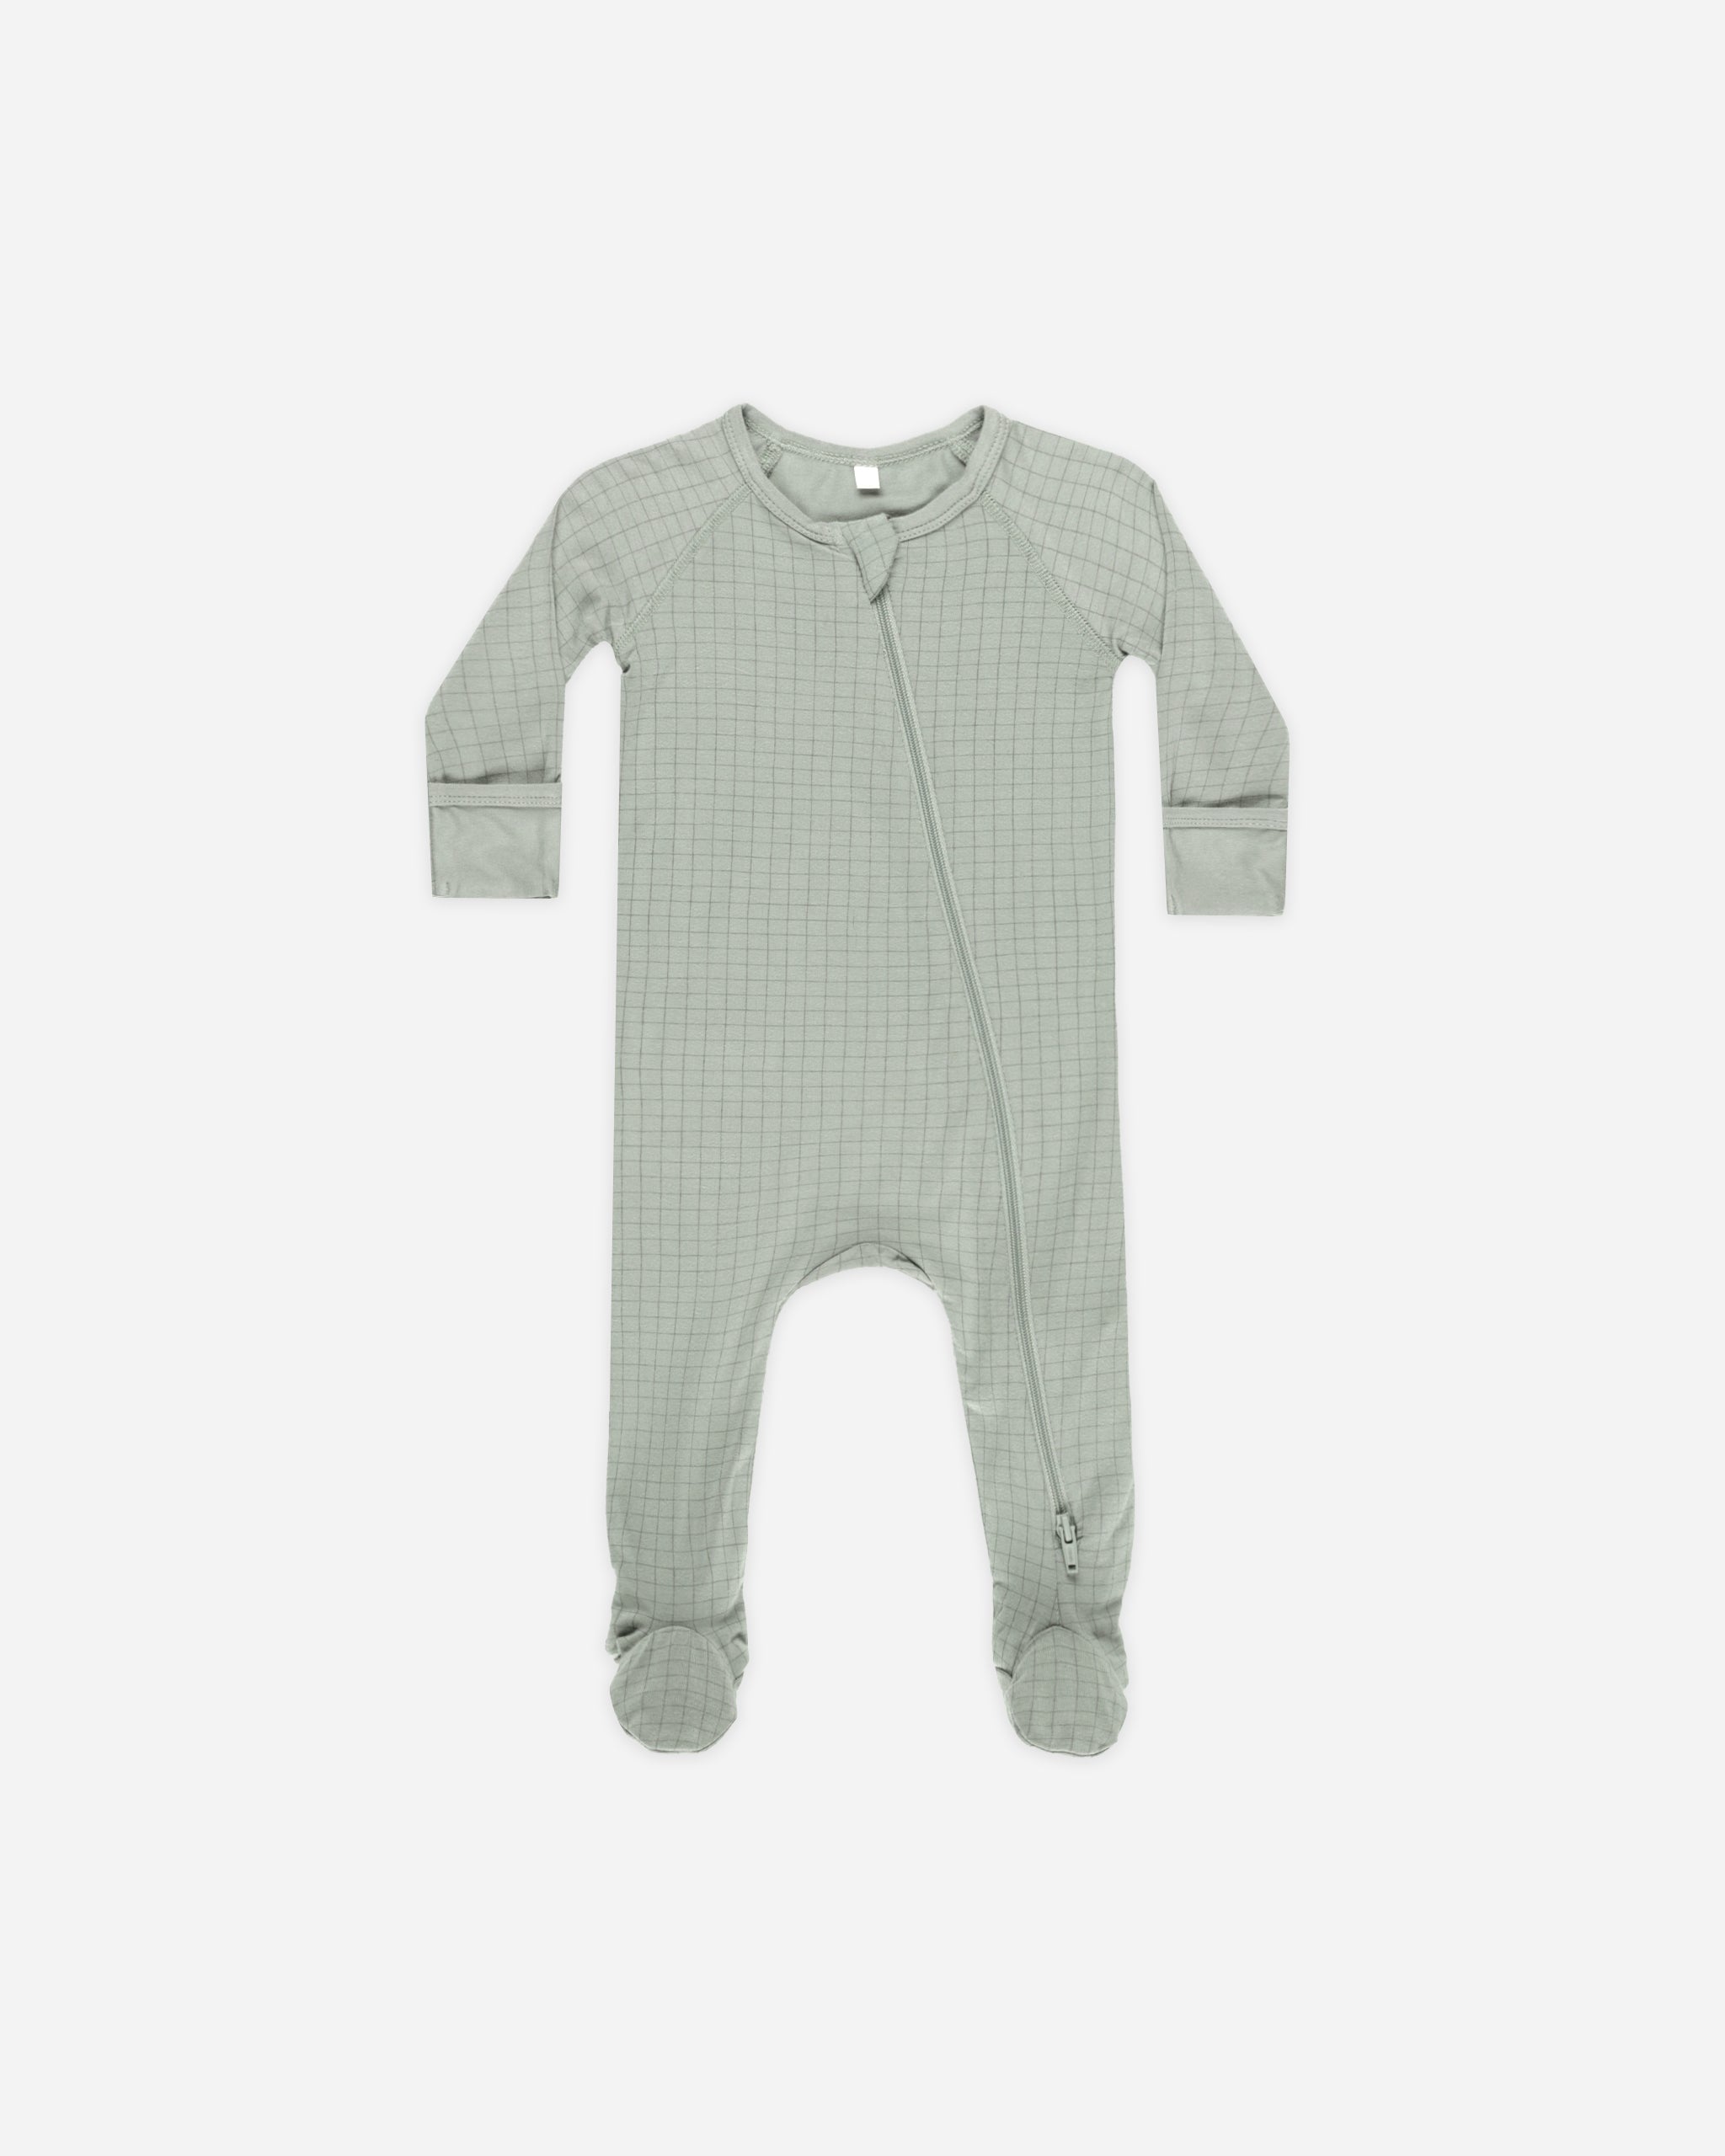 Bamboo Zip Footie || Grid - Rylee + Cru | Kids Clothes | Trendy Baby Clothes | Modern Infant Outfits |